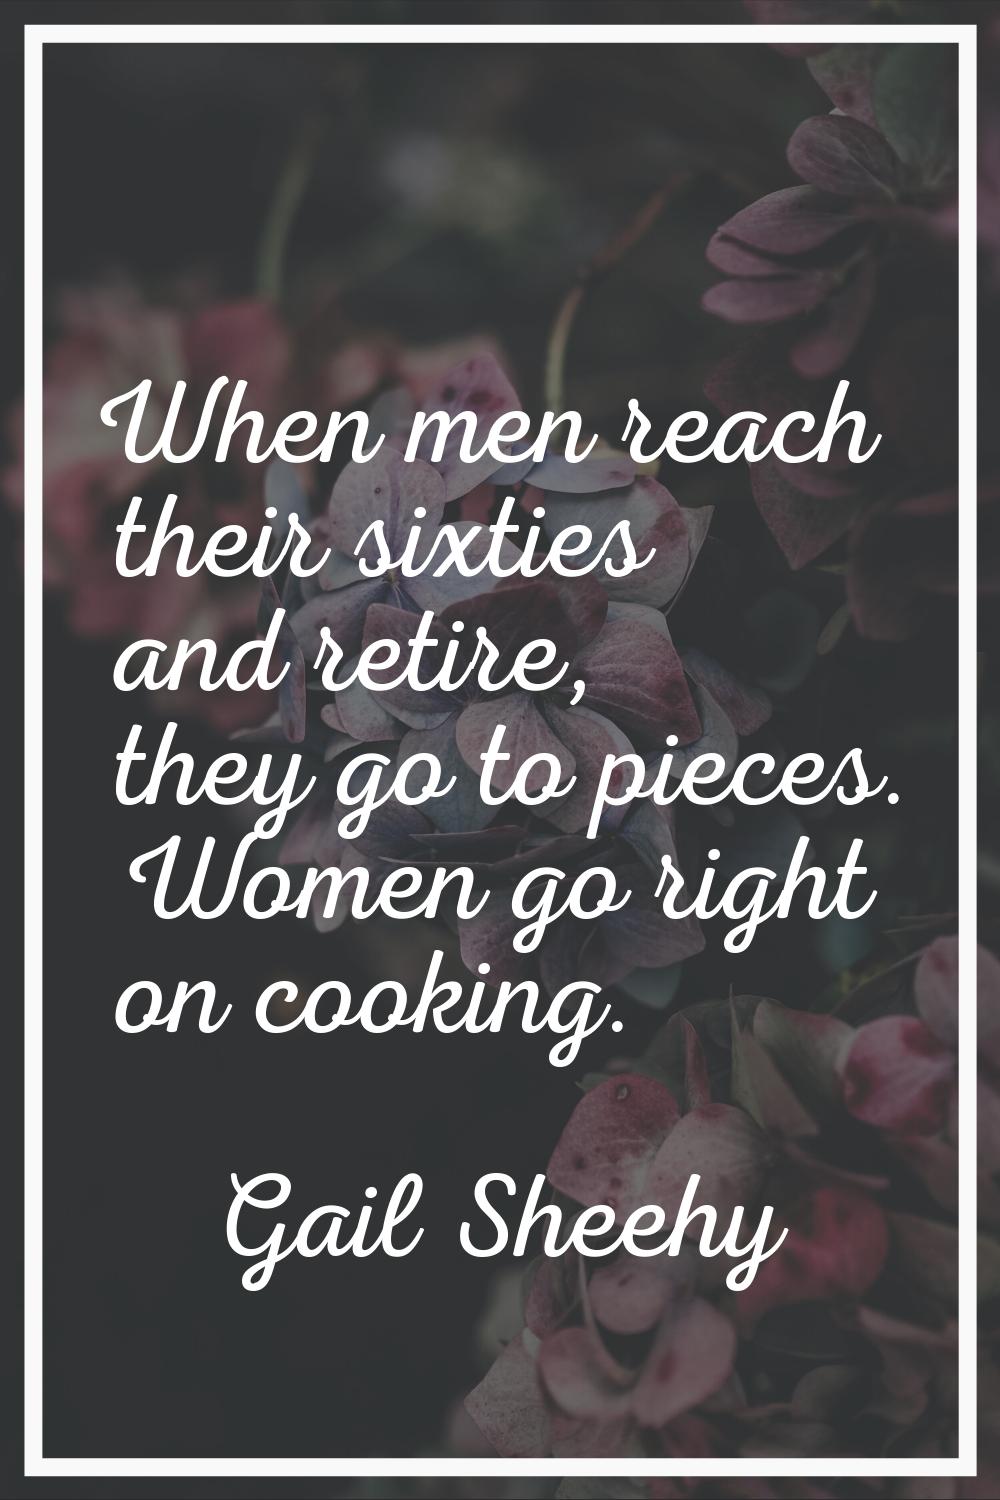 When men reach their sixties and retire, they go to pieces. Women go right on cooking.